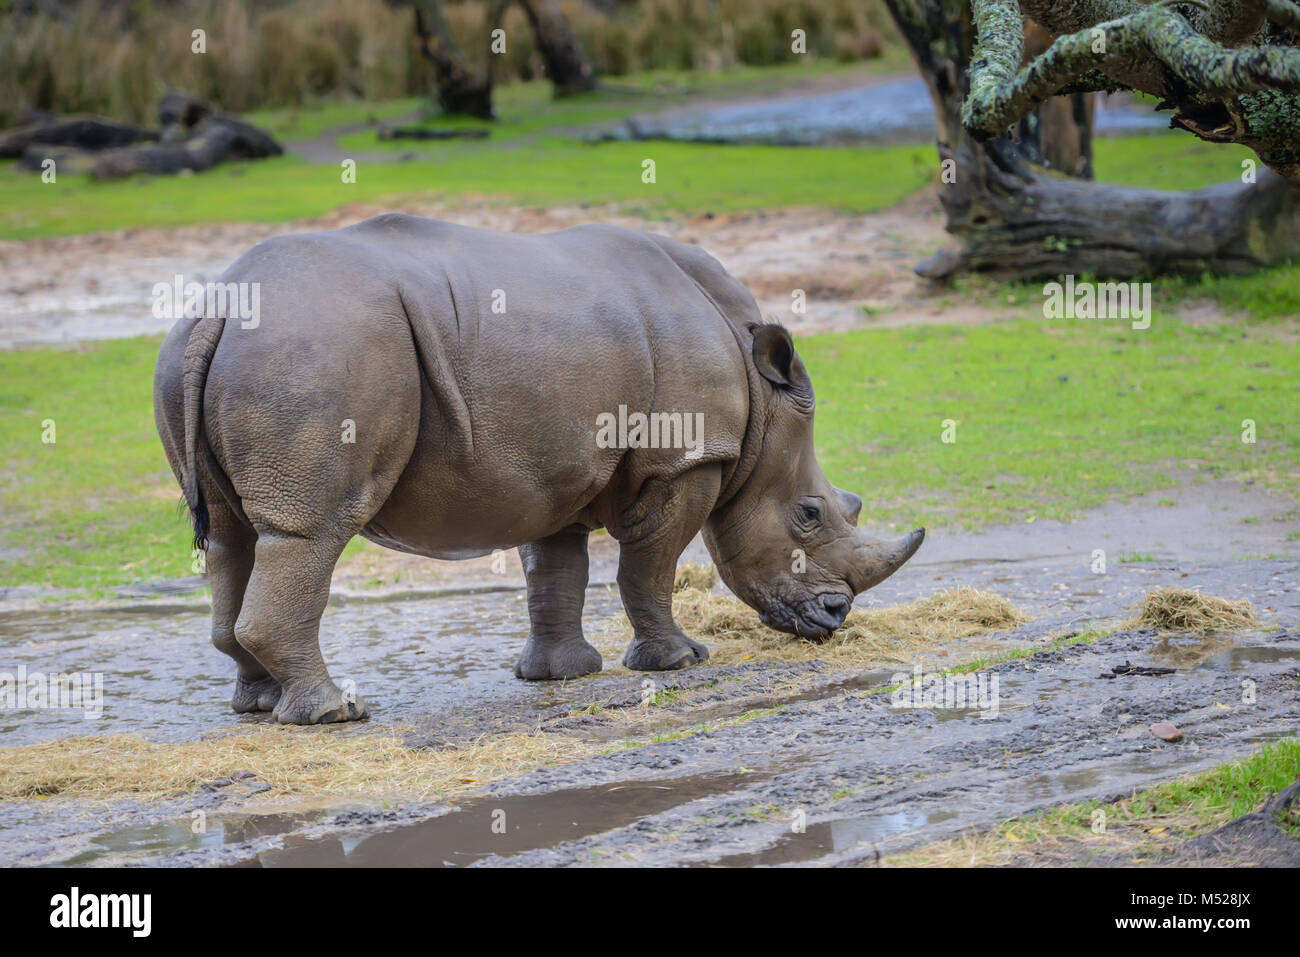 A large rhinocerous eating straw on a rainy day at the Animal Kingdom in the Walt Disney World Resort in Orlando, Florida. Stock Photo